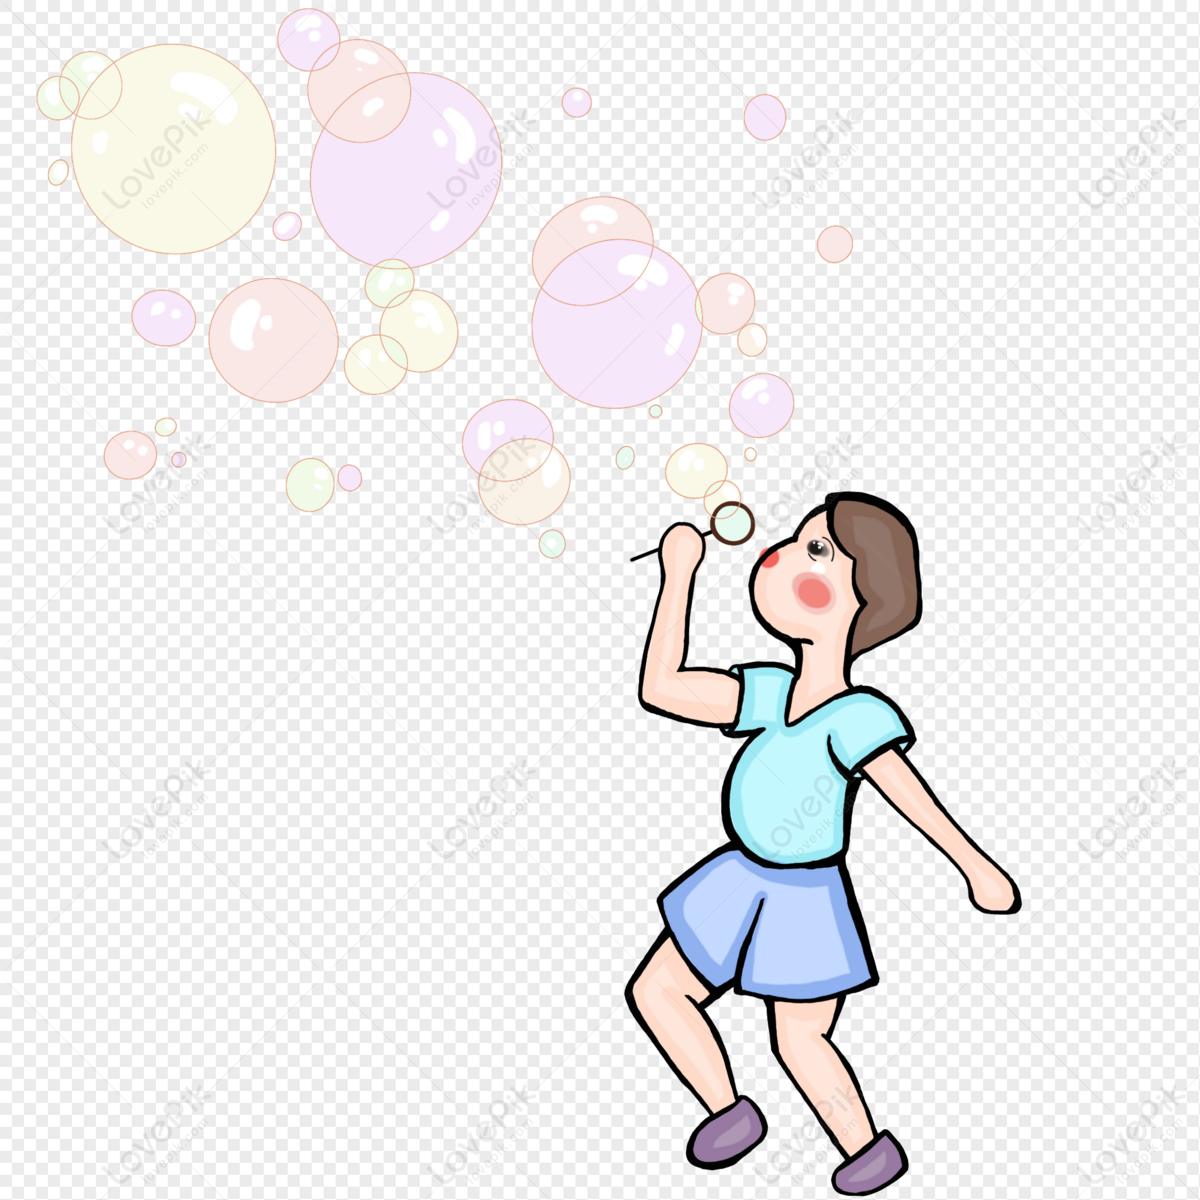 Childlike Blowing Bubbles PNG Image Free Download And Clipart Image For  Free Download - Lovepik | 401297951